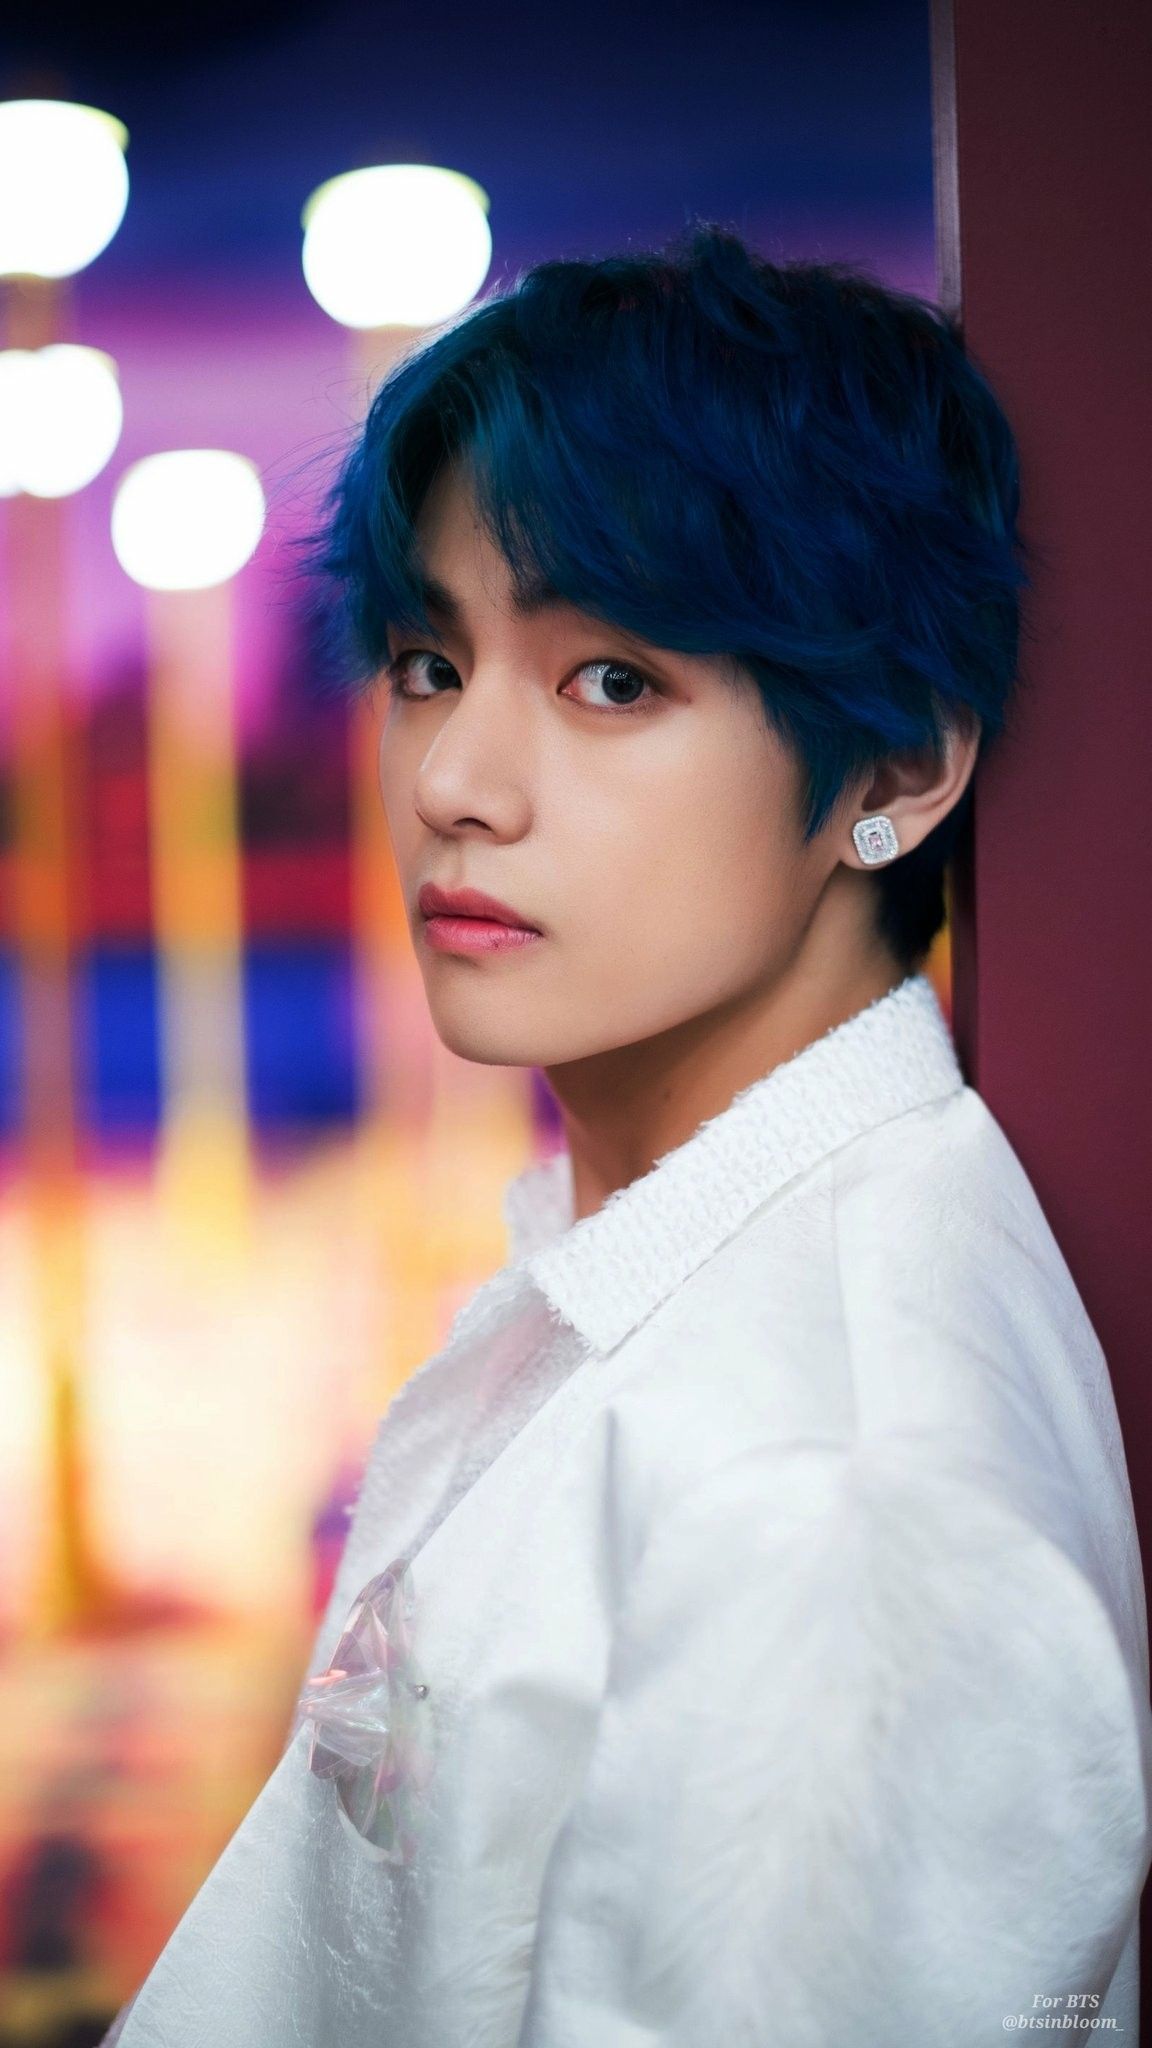 NAVER x Dispatch HD #TAEHYUNG 'Boy With Luv' WALLPAPERS